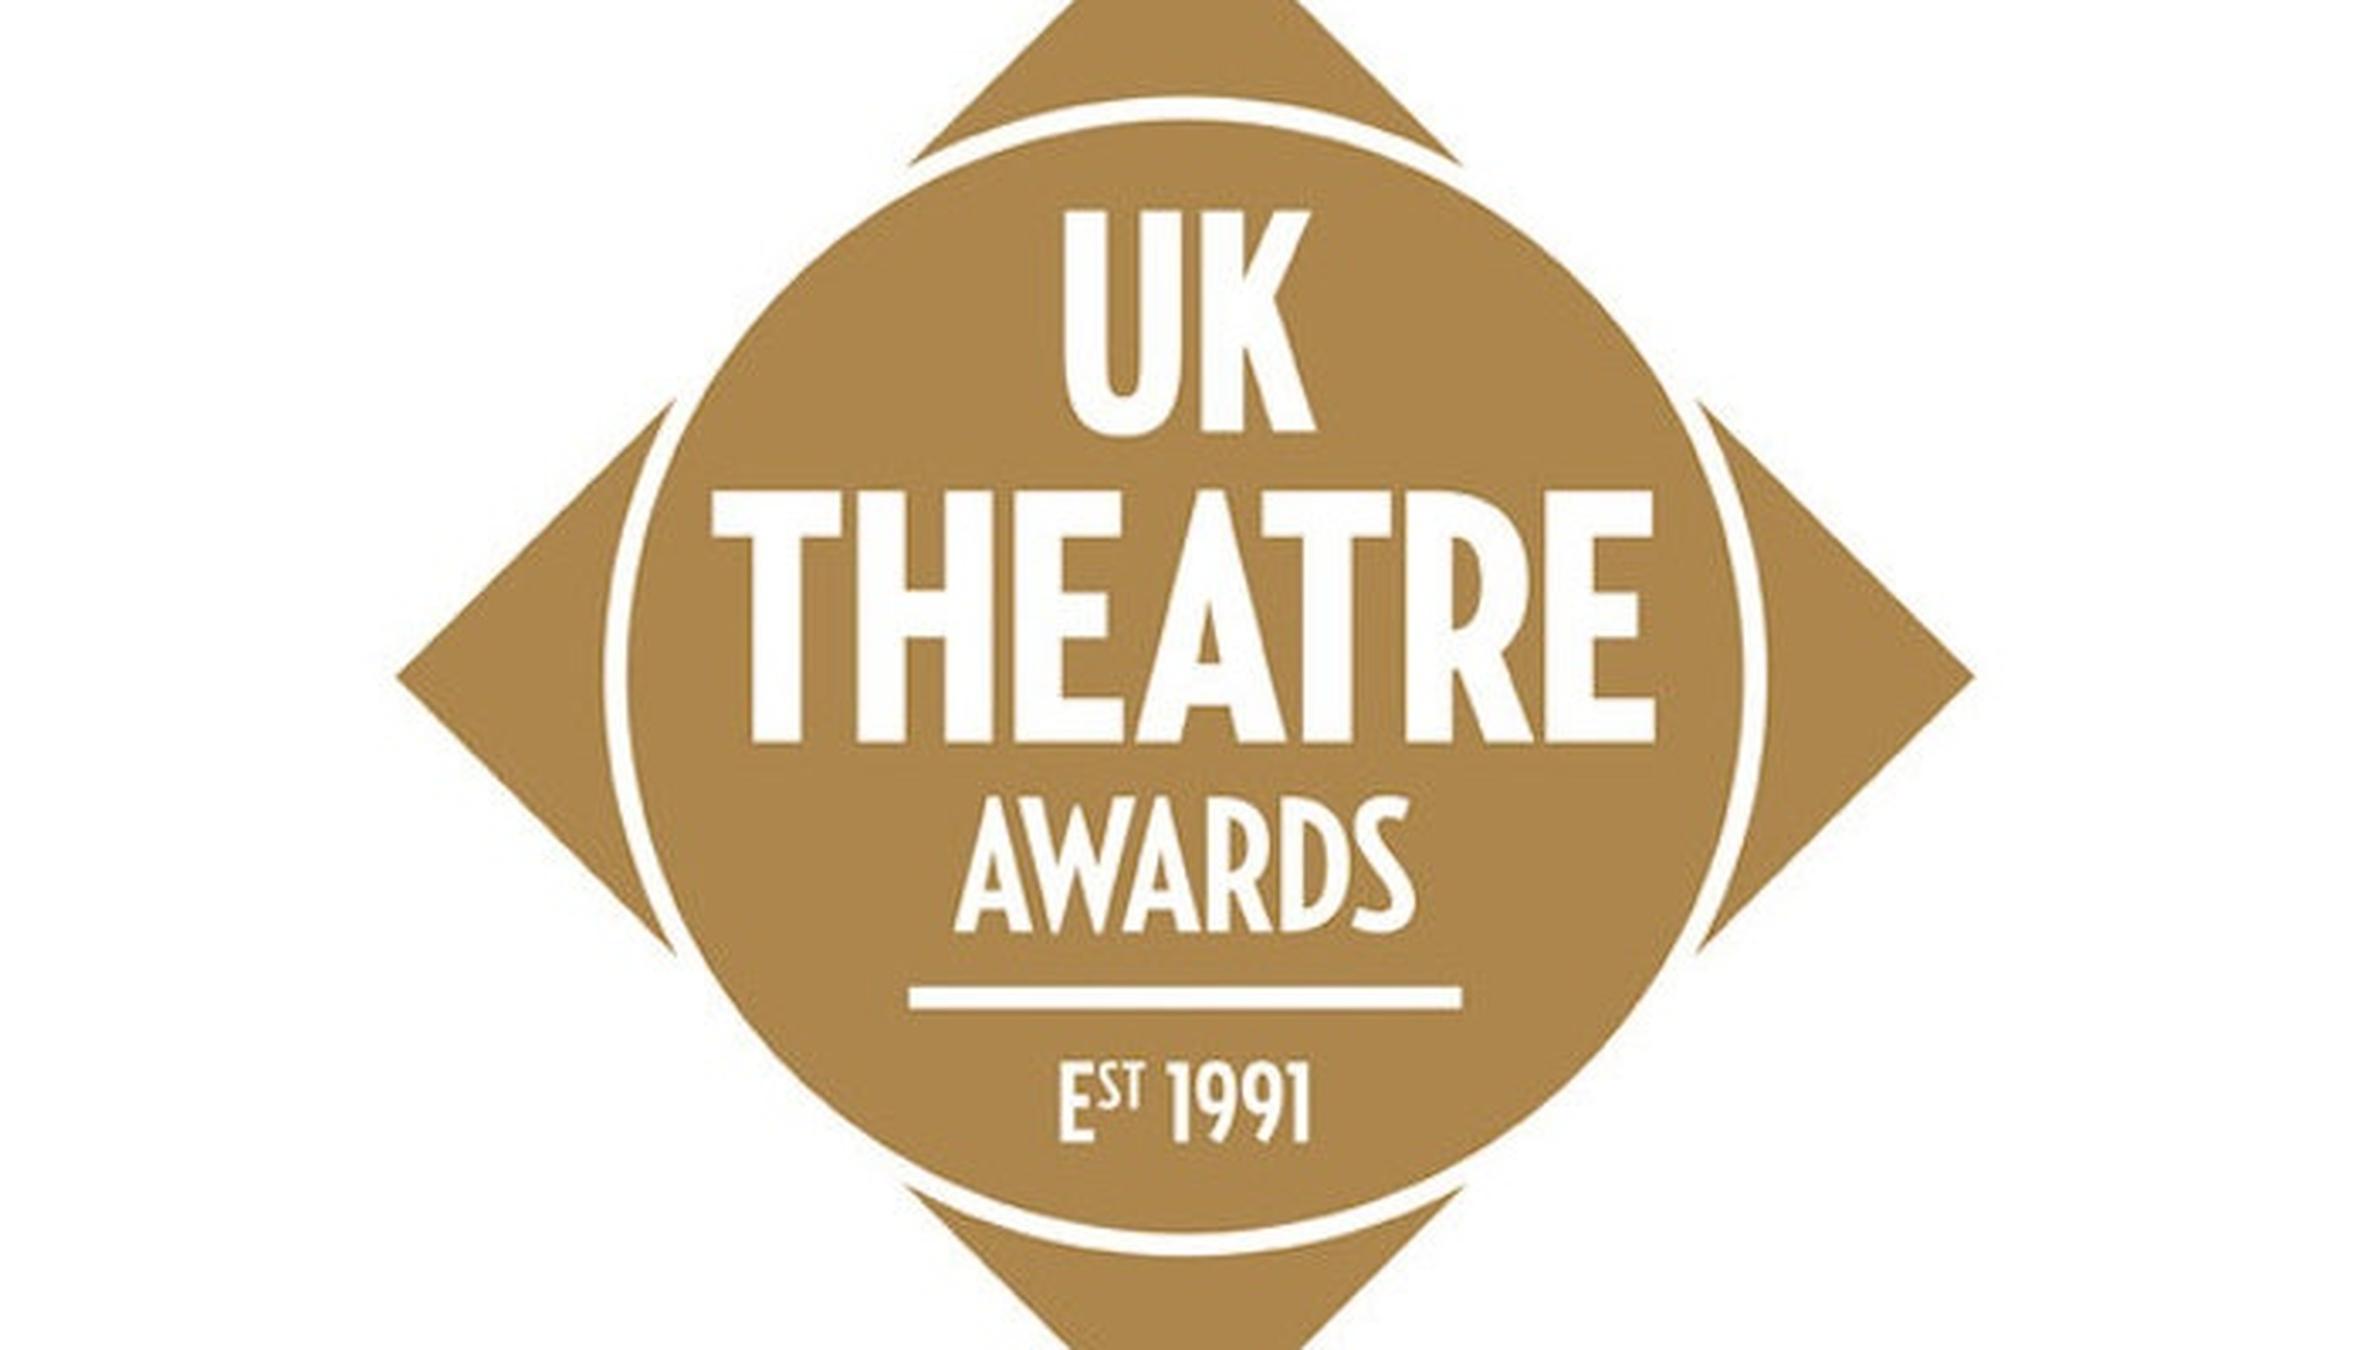 UK Theatre Awards Features AllFemale Nominees for Best New Play